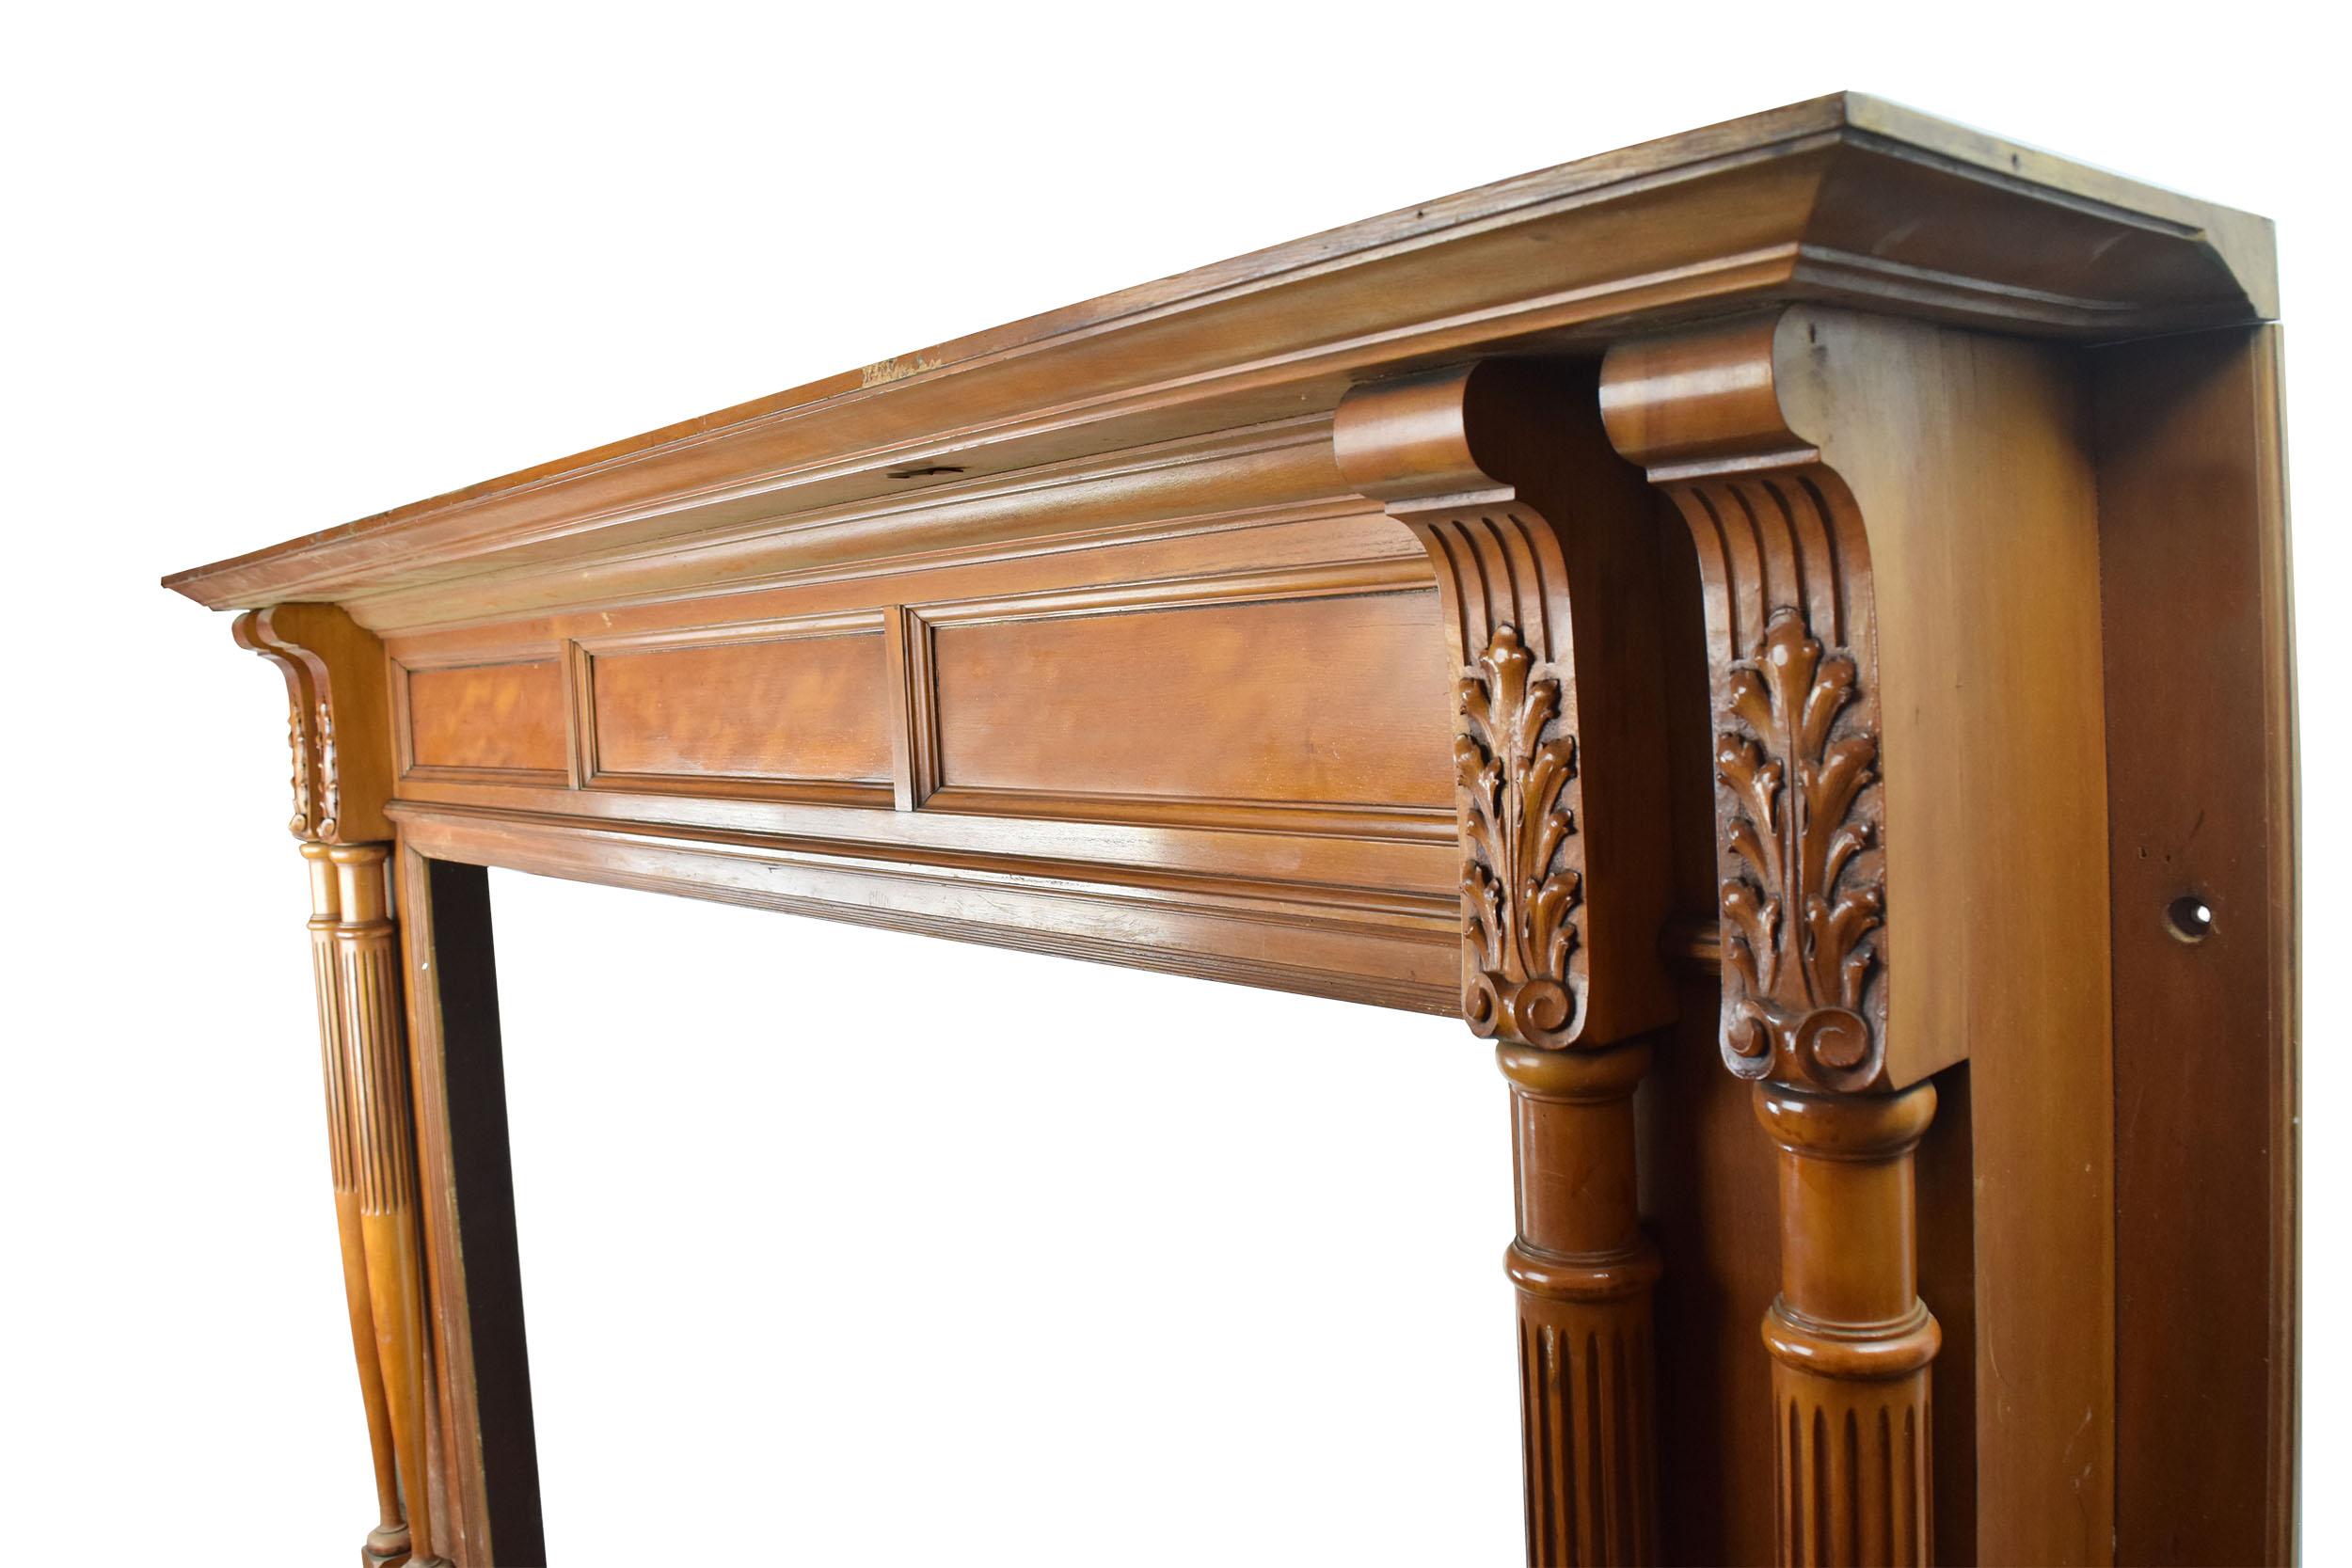 This beautiful half mantel would be a magnificent showcase of a frame surrounding a fireplace. Made out of maple wood, this lovely frame displays exquisitely carved spindles on either side. These leafy designs are very Victorian in style, which